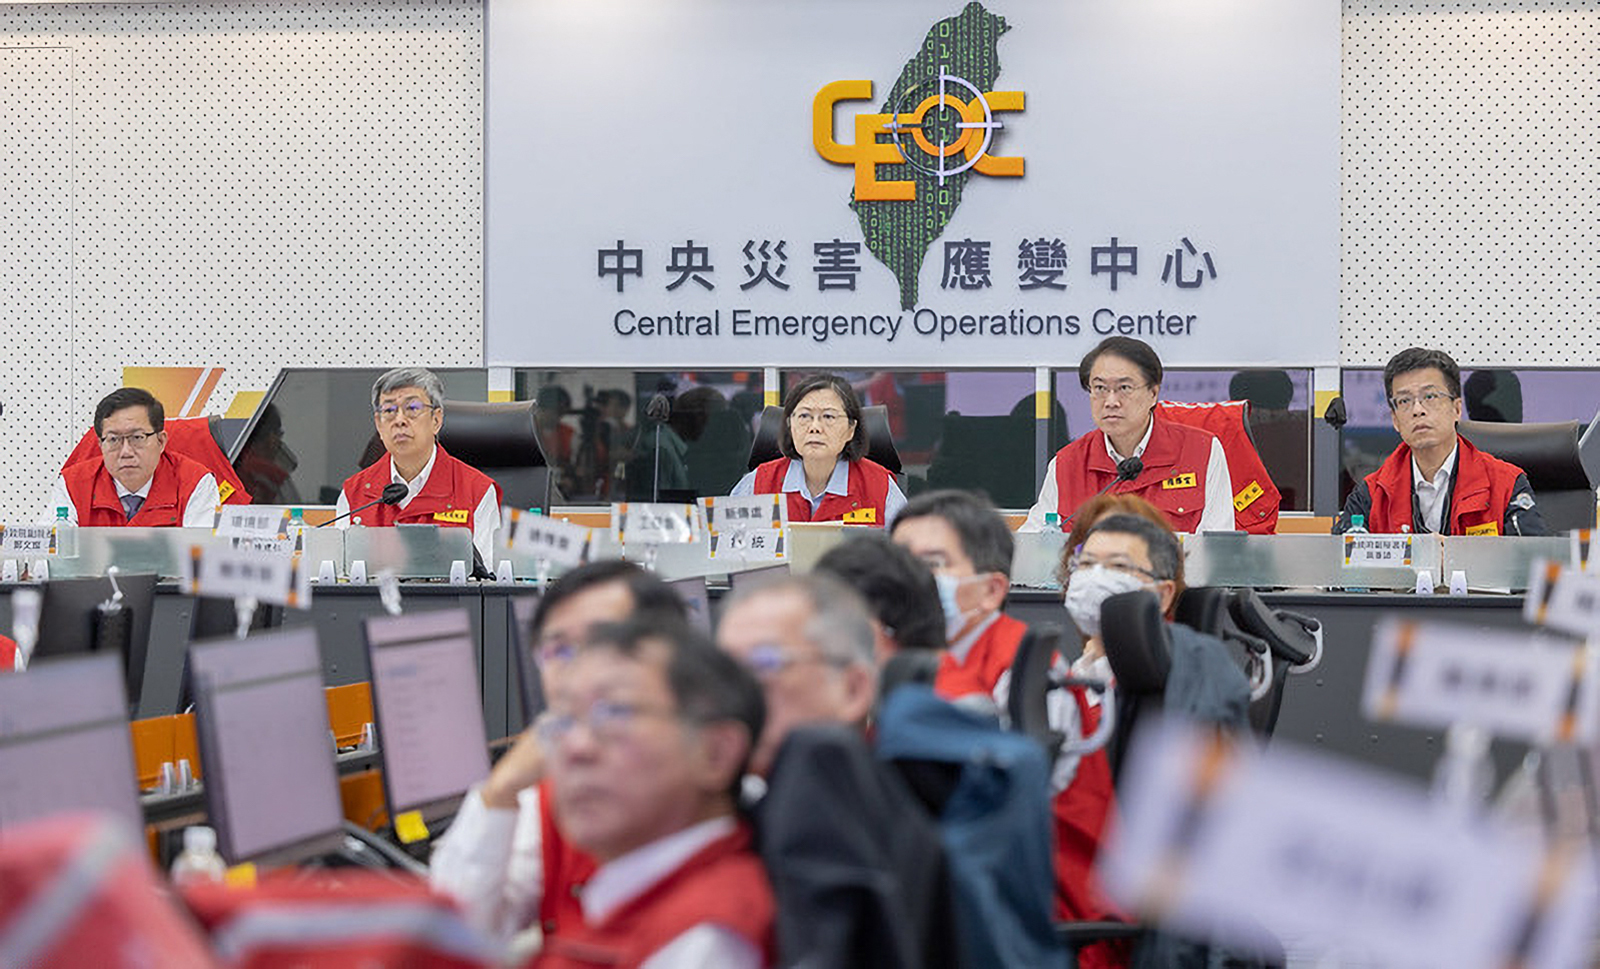 Taiwanese President Tsai Ing-wen and Executive Director Chen Jianren hold a press conference as they visit the Central Disaster Response Center to learn about the earthquake disaster and rescue response situation, in Taipei, Taiwan on April 3.